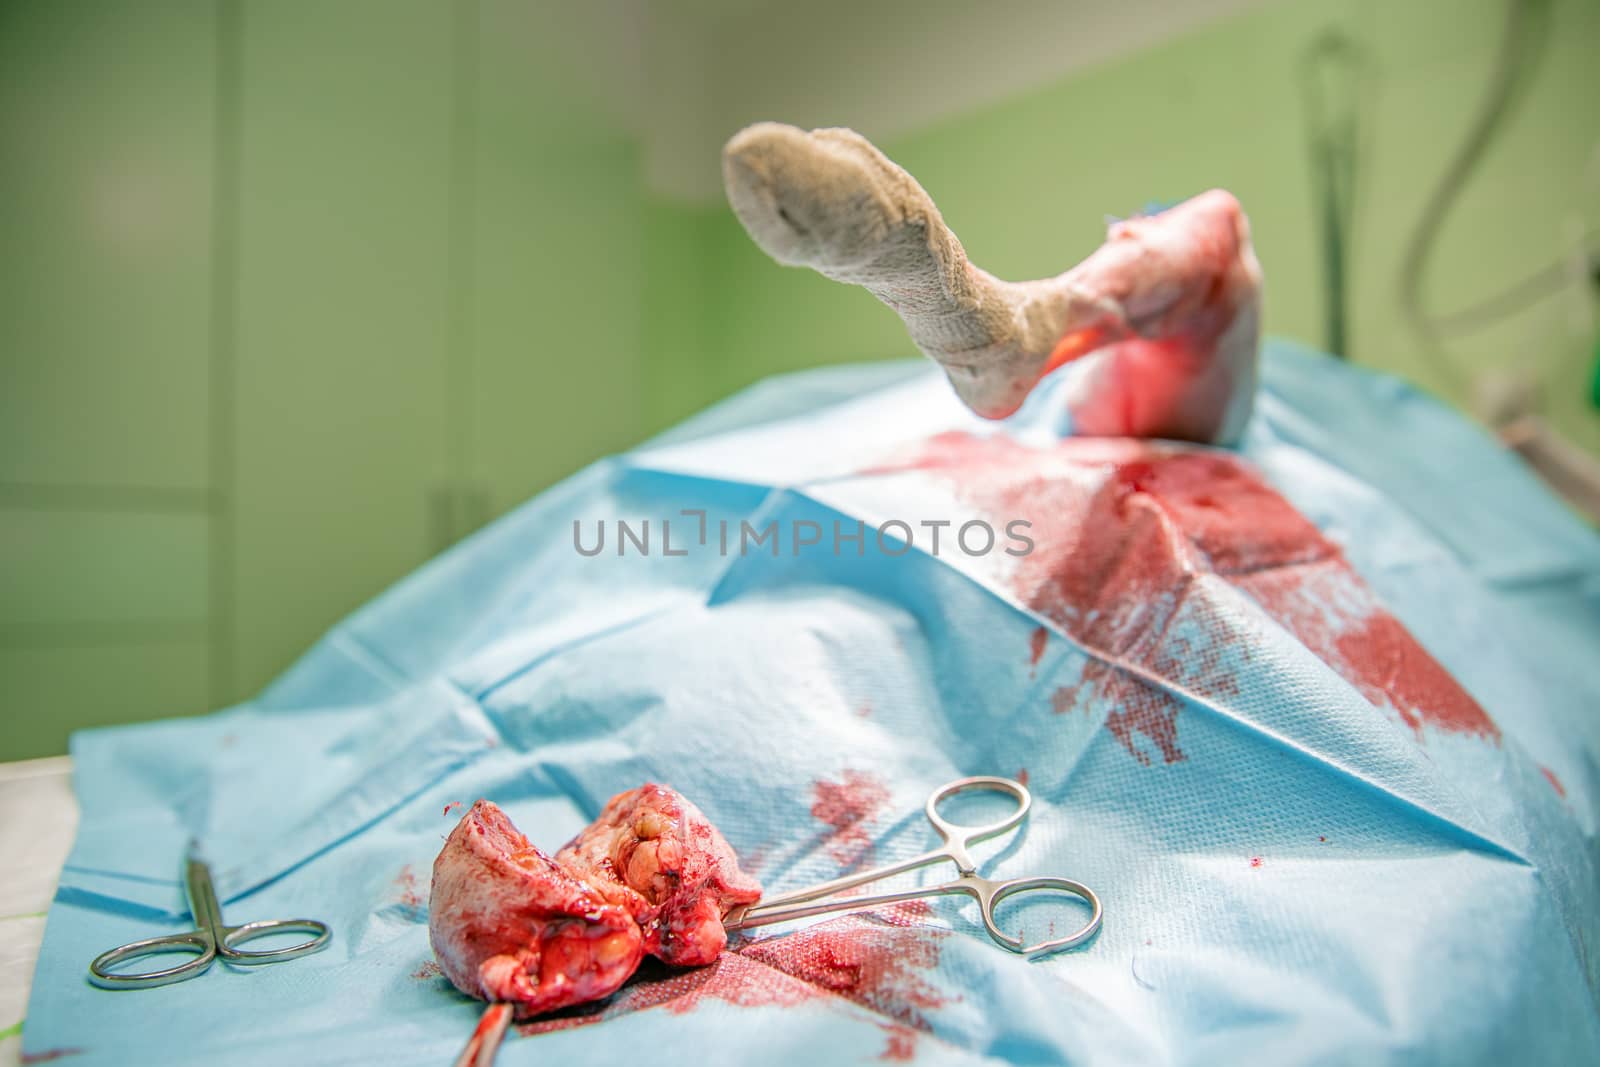 removal of benign tumor on the dog's paw by surgery.